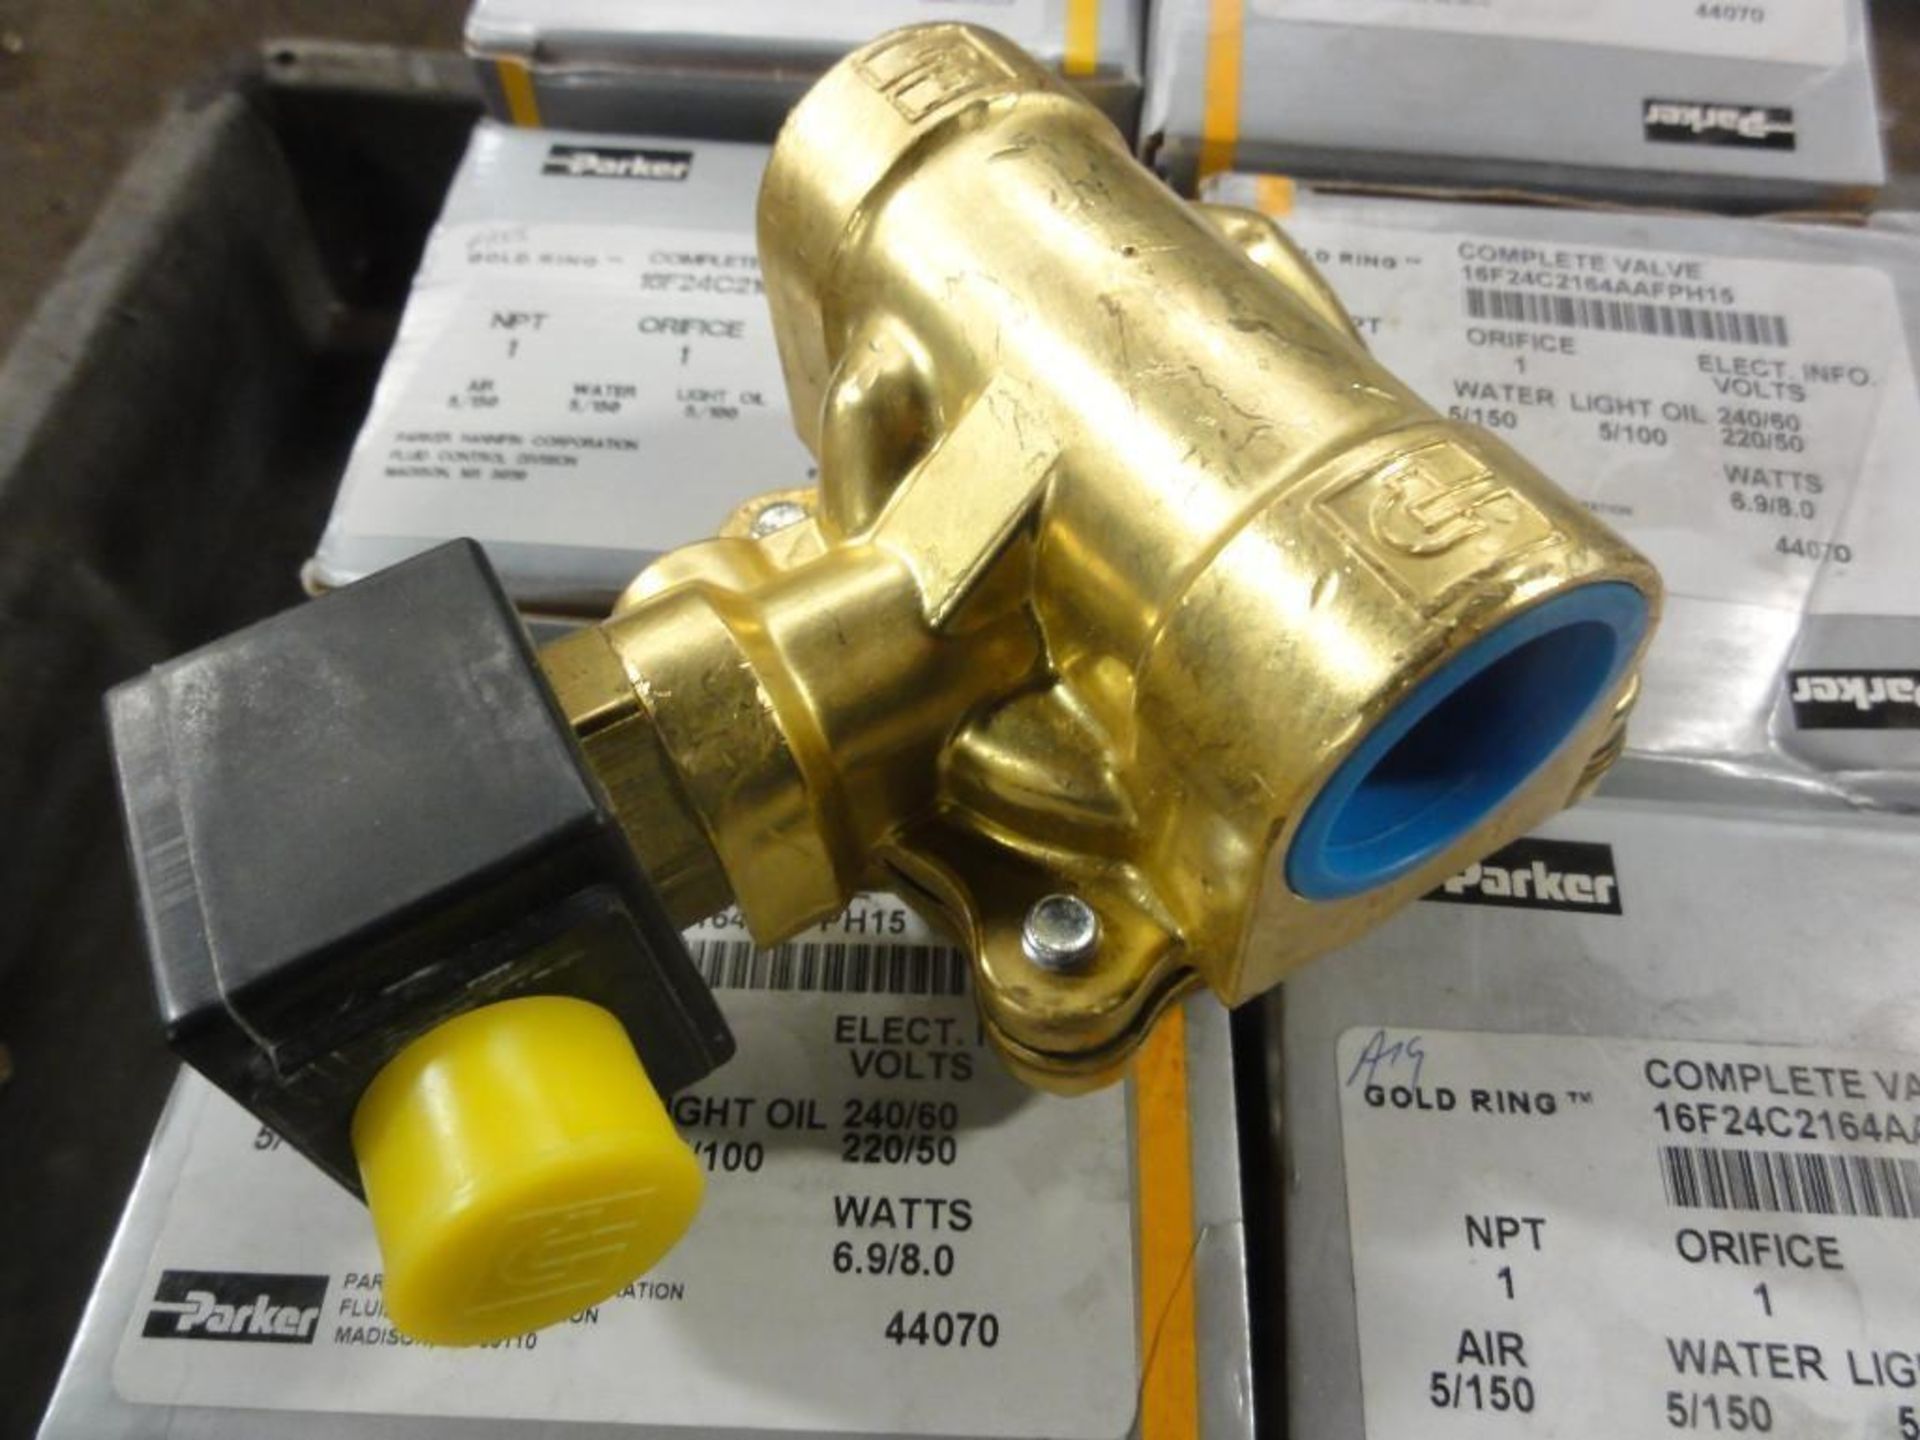 (8) NEW, Parker Complete Valves, Model 16F24C2164AAFPH15, NPT: 1, Oriface: 1, Air: 5/150, Water: 5/ - Image 2 of 6